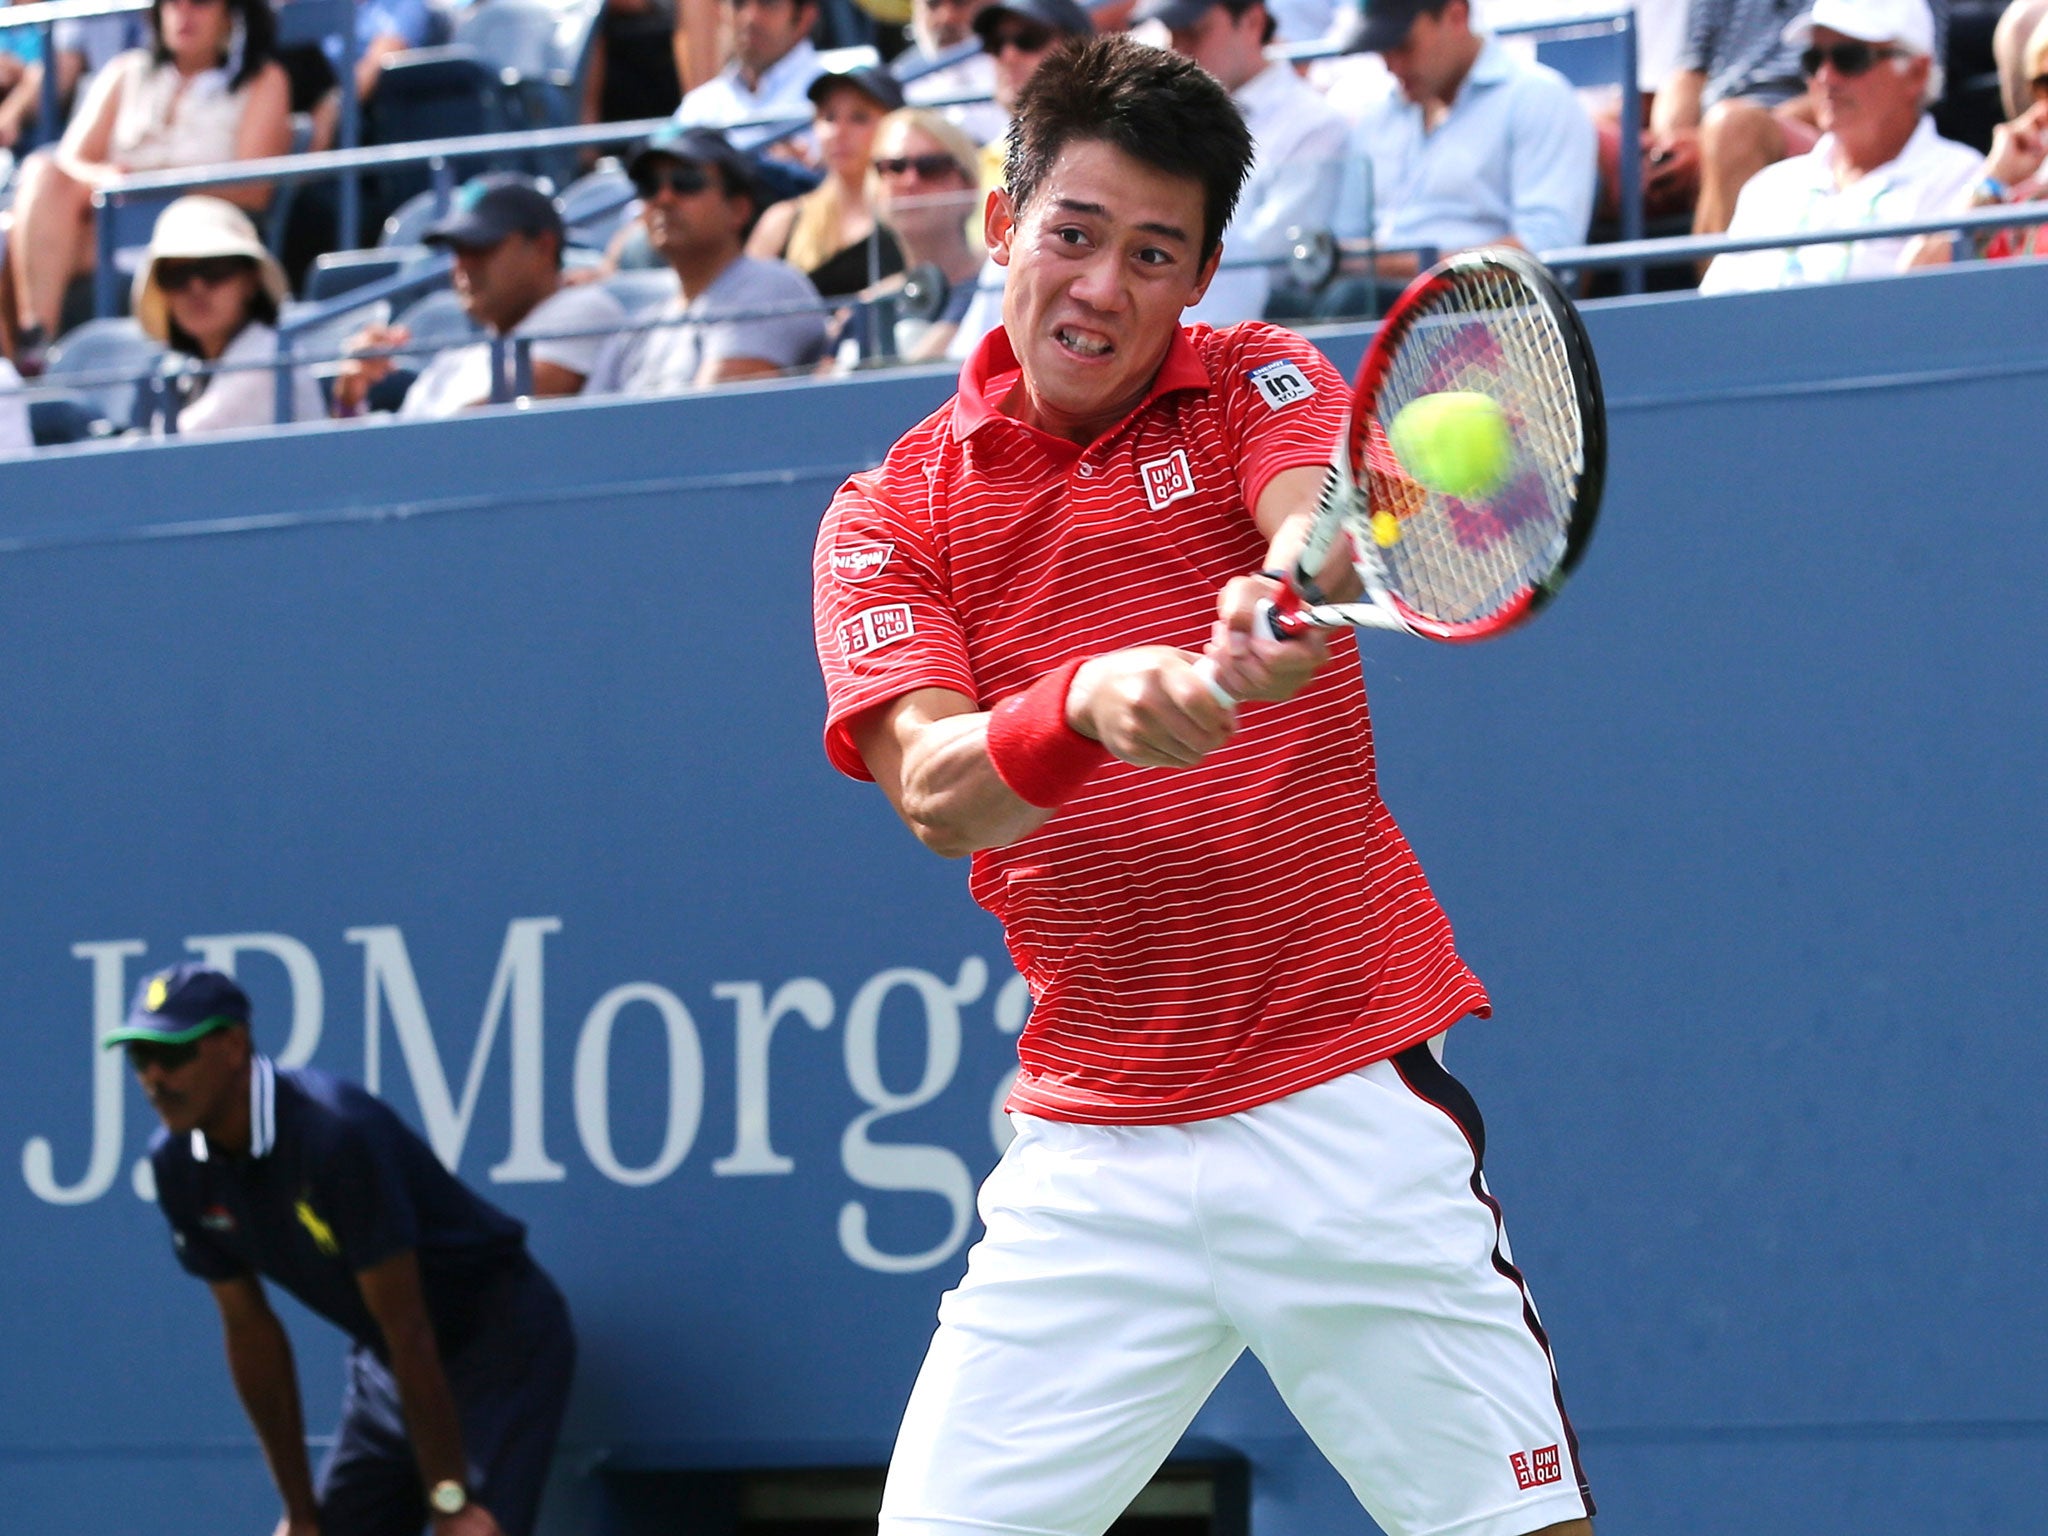 Kei Nishikori is the first man from Japan to achieve a world top 10 ranking